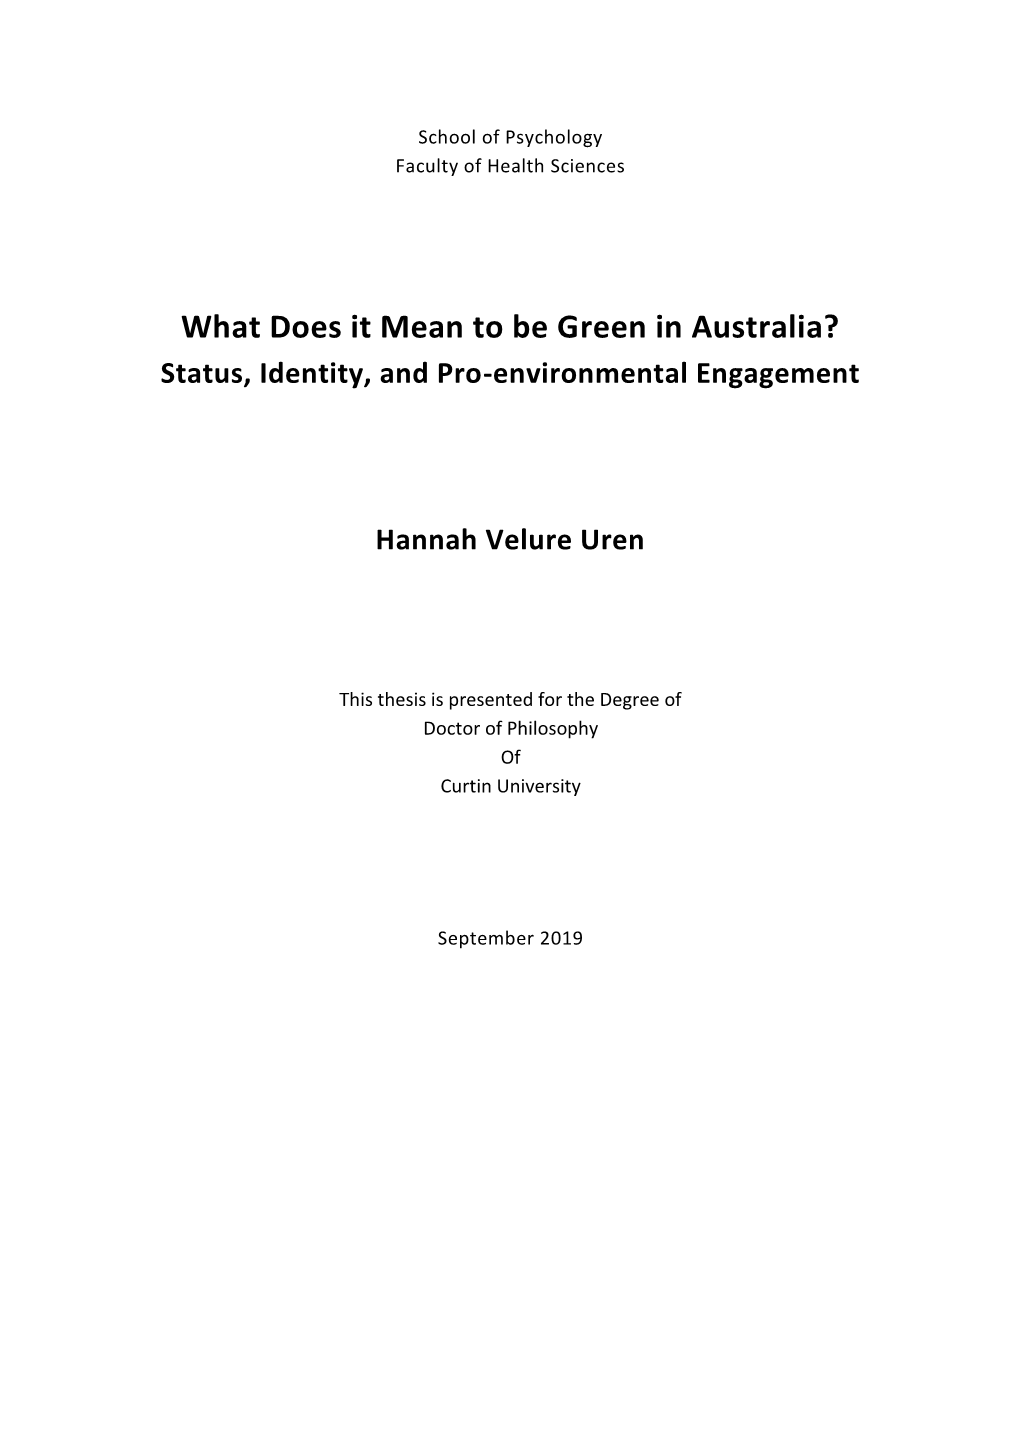 What Does It Mean to Be Green in Australia? Status, Identity, and Pro-Environmental Engagement